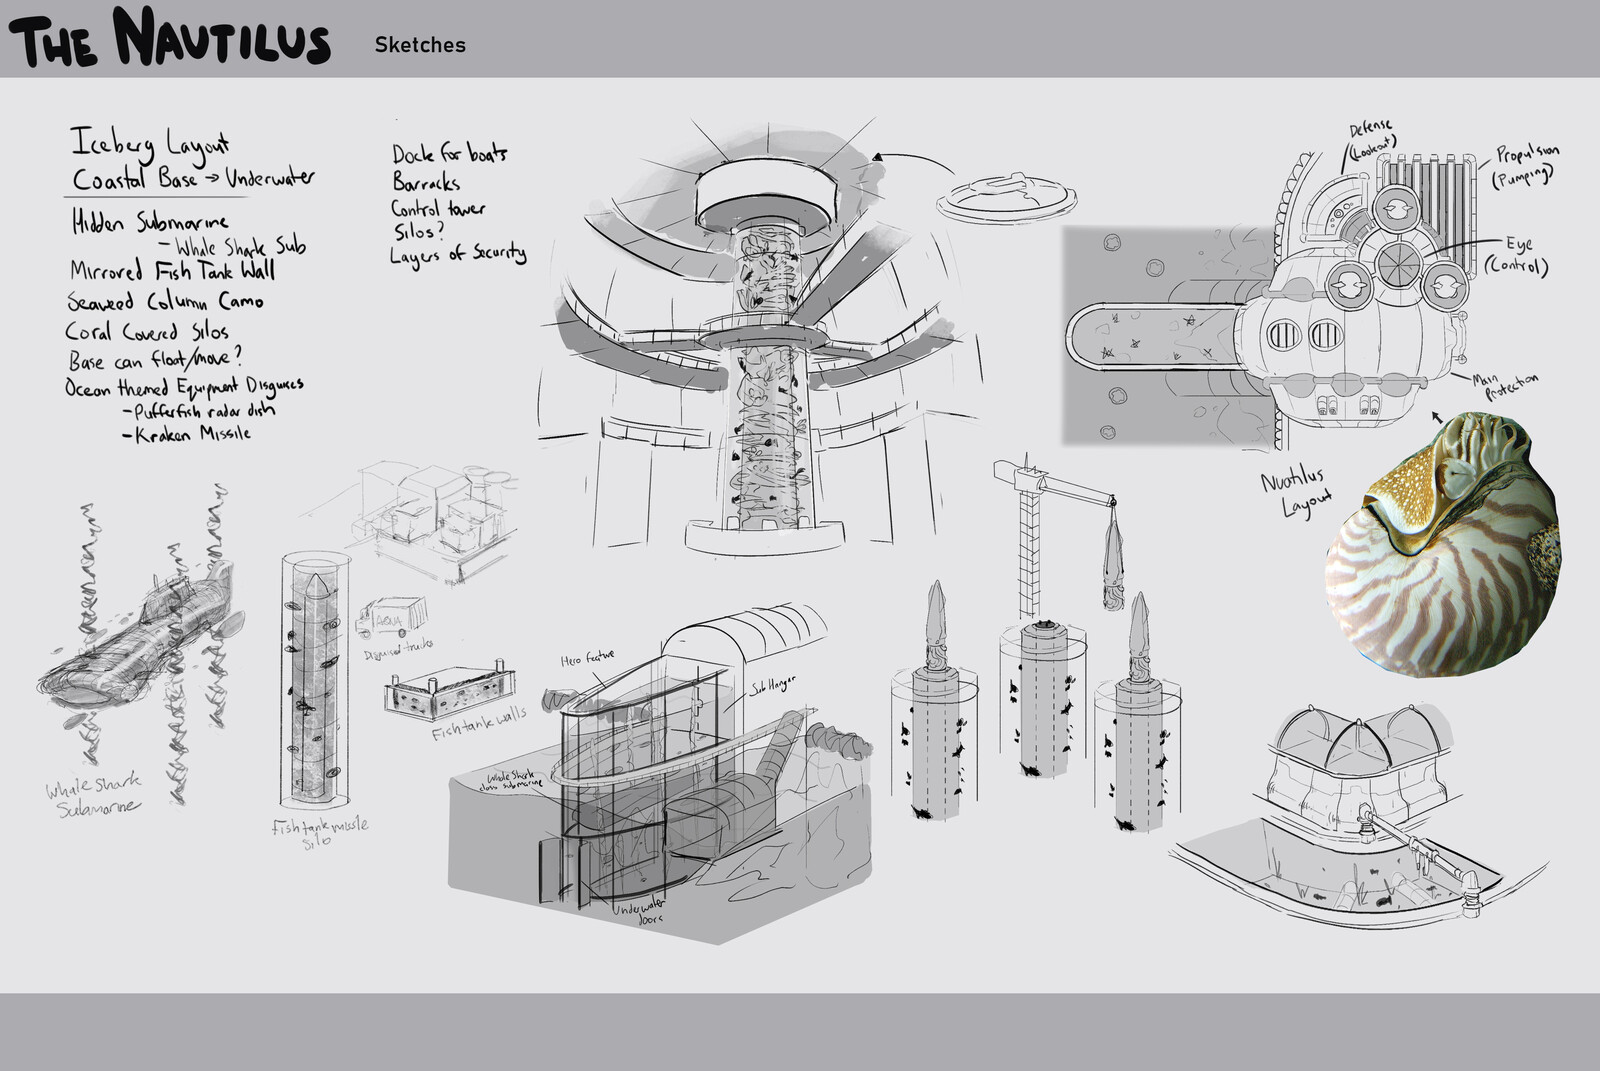 Initial concepts looking for a central idea to focus on (using a Nautilus to guide layout and defensive aesthetic).